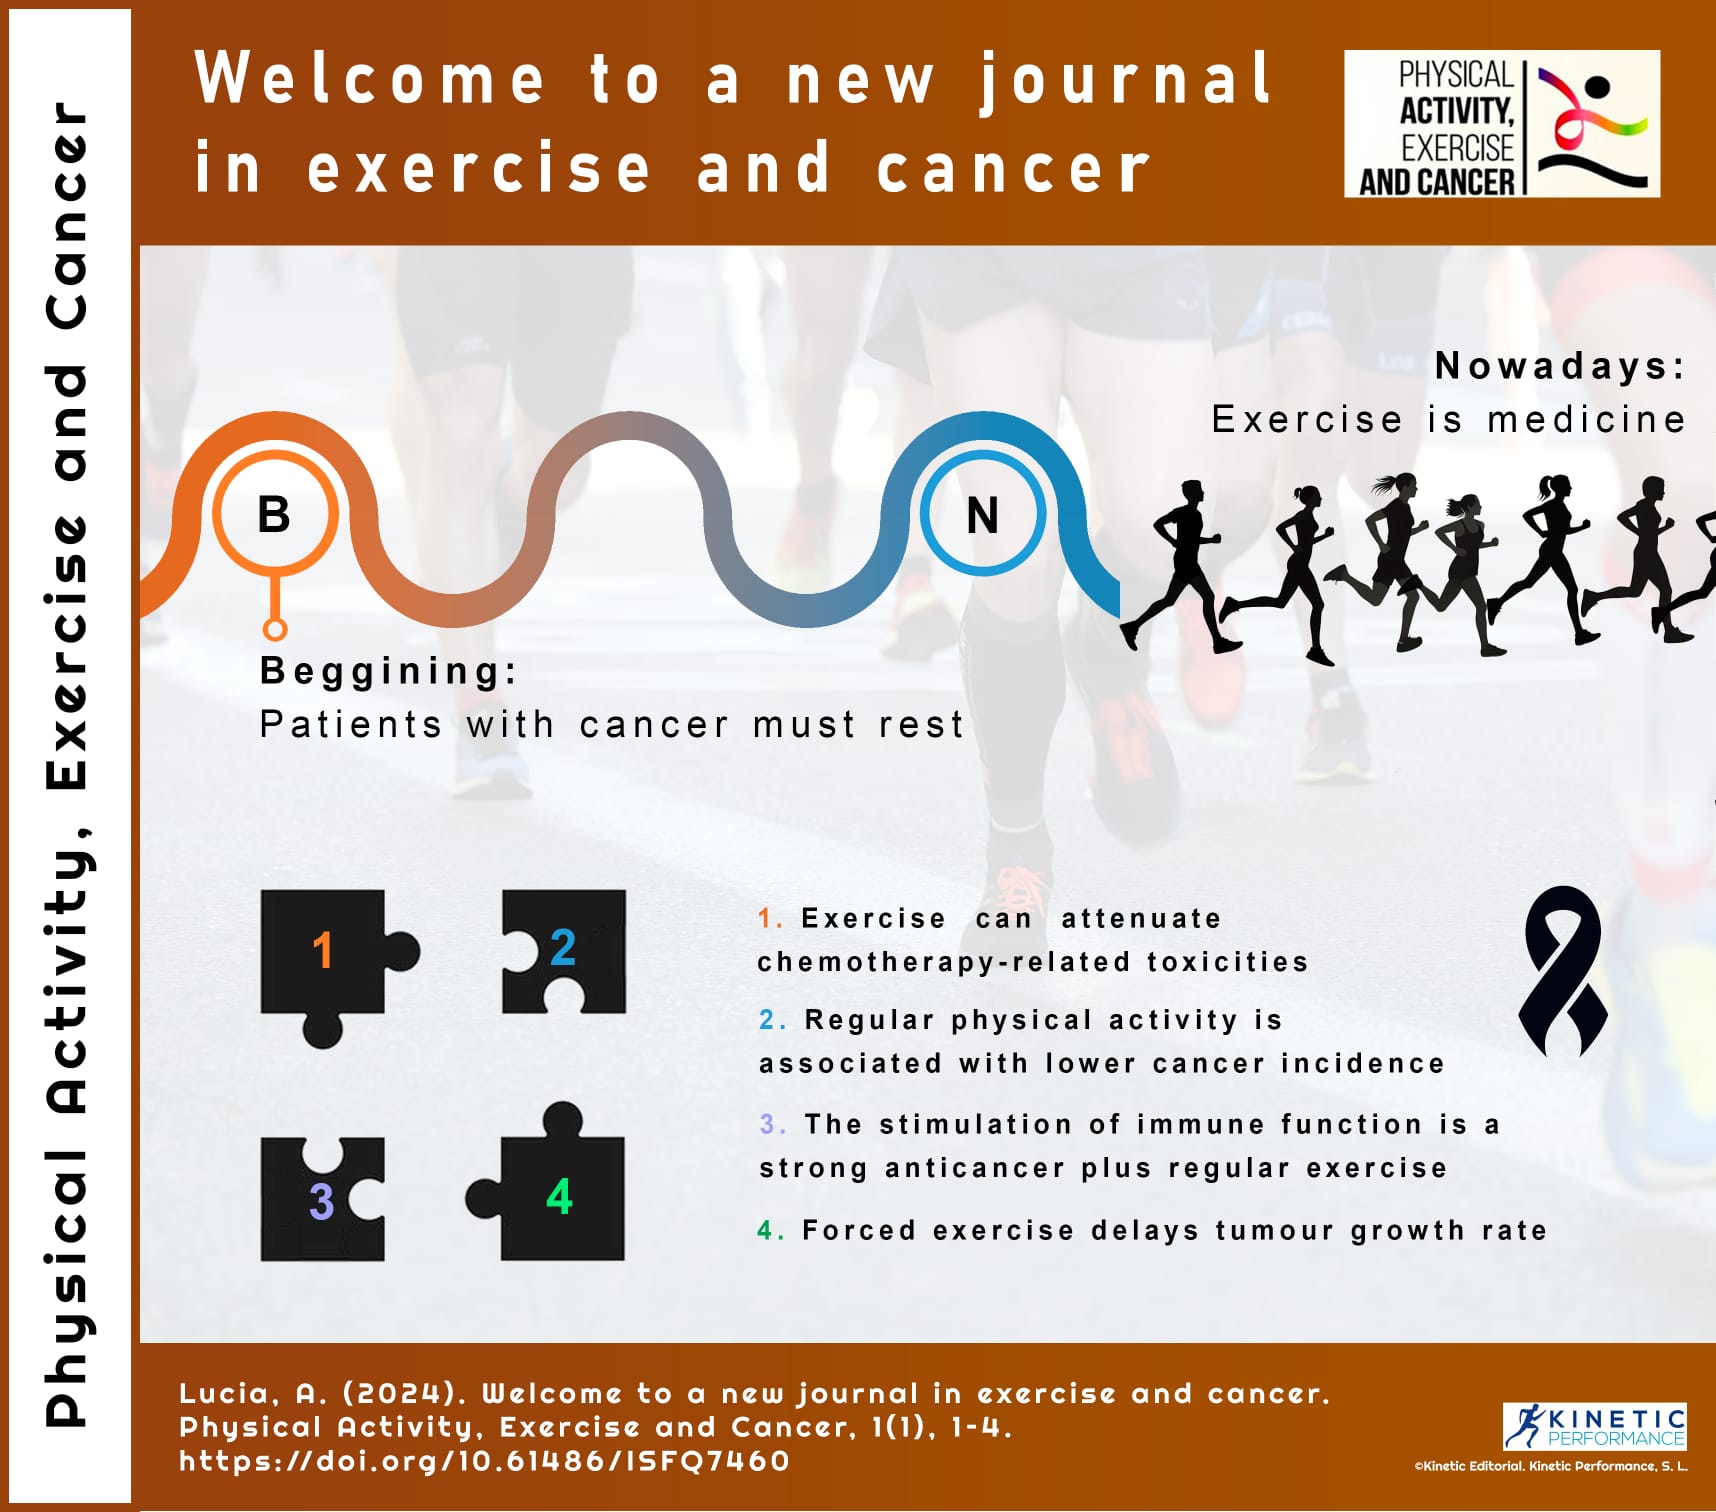 Welcome to a new journal in exercise and cancer